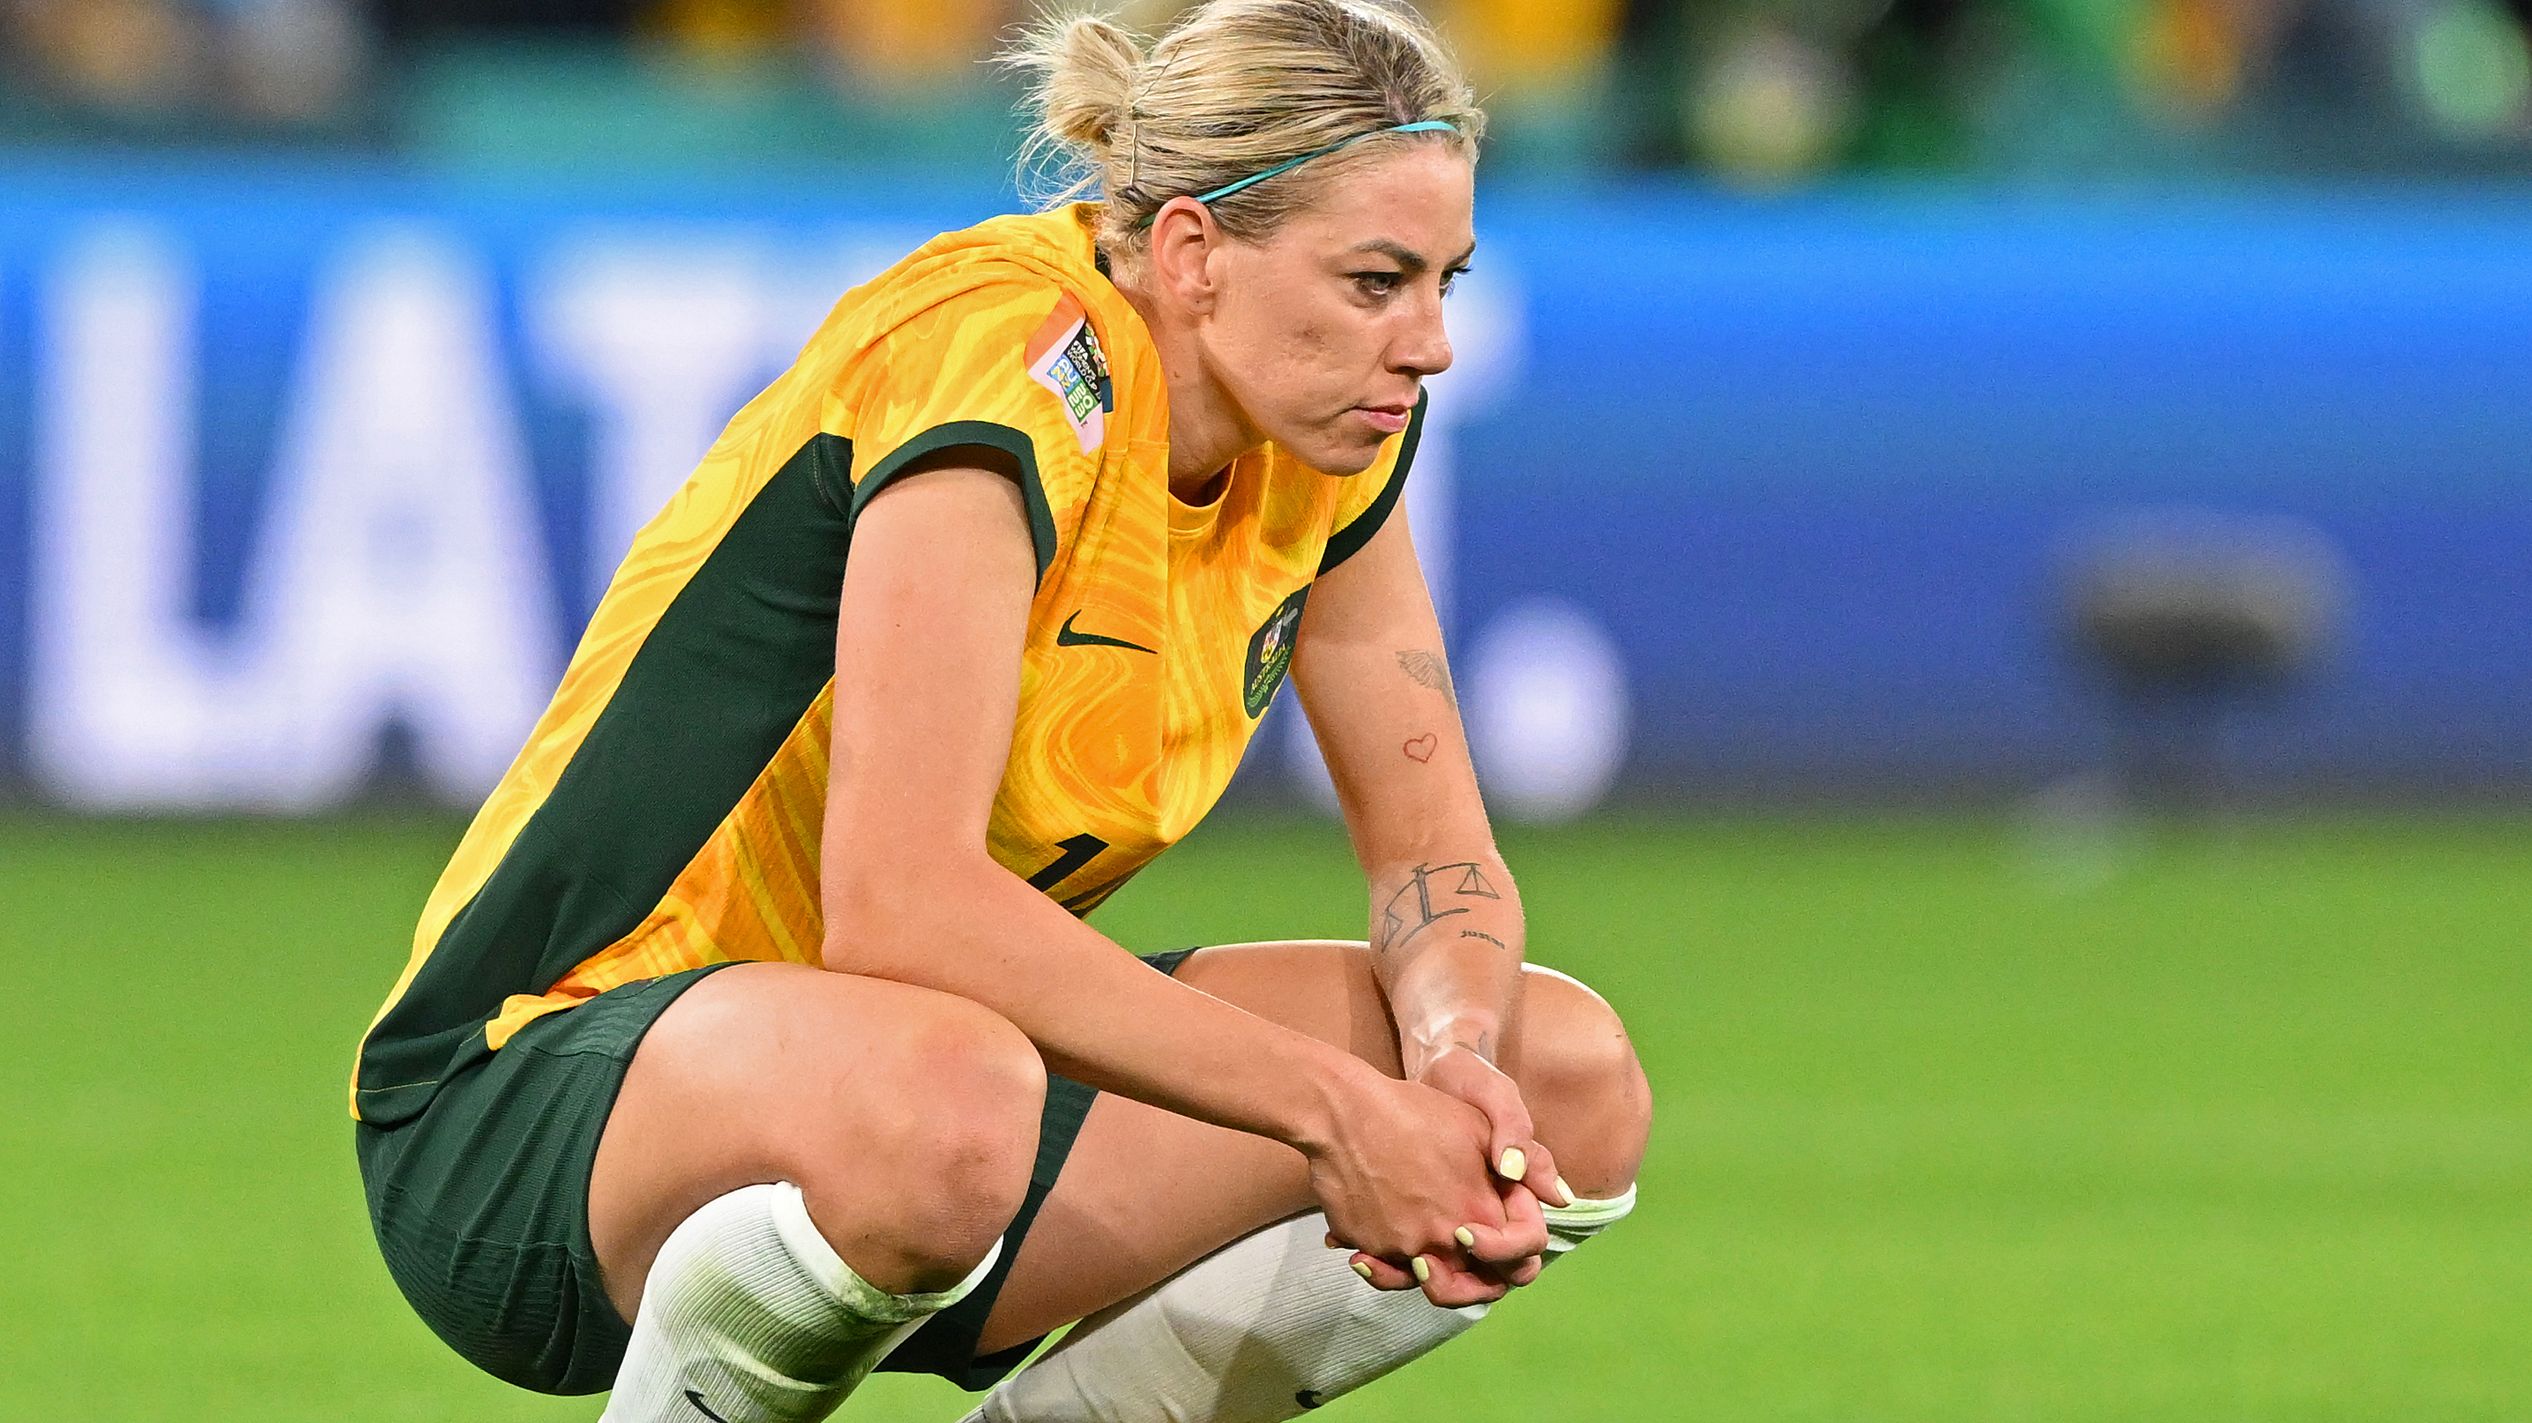 BRISBANE, AUSTRALIA - JULY 27: Alanna Kennedy of Australia shows dejection after her team&#x27;s 2-3 defeat in the FIFA Women&#x27;s World Cup Australia &amp; New Zealand 2023 Group B match between Australia and Nigeria at Brisbane Stadium on July 27, 2023 in Brisbane, Australia. (Photo by Bradley Kanaris/Getty Images)